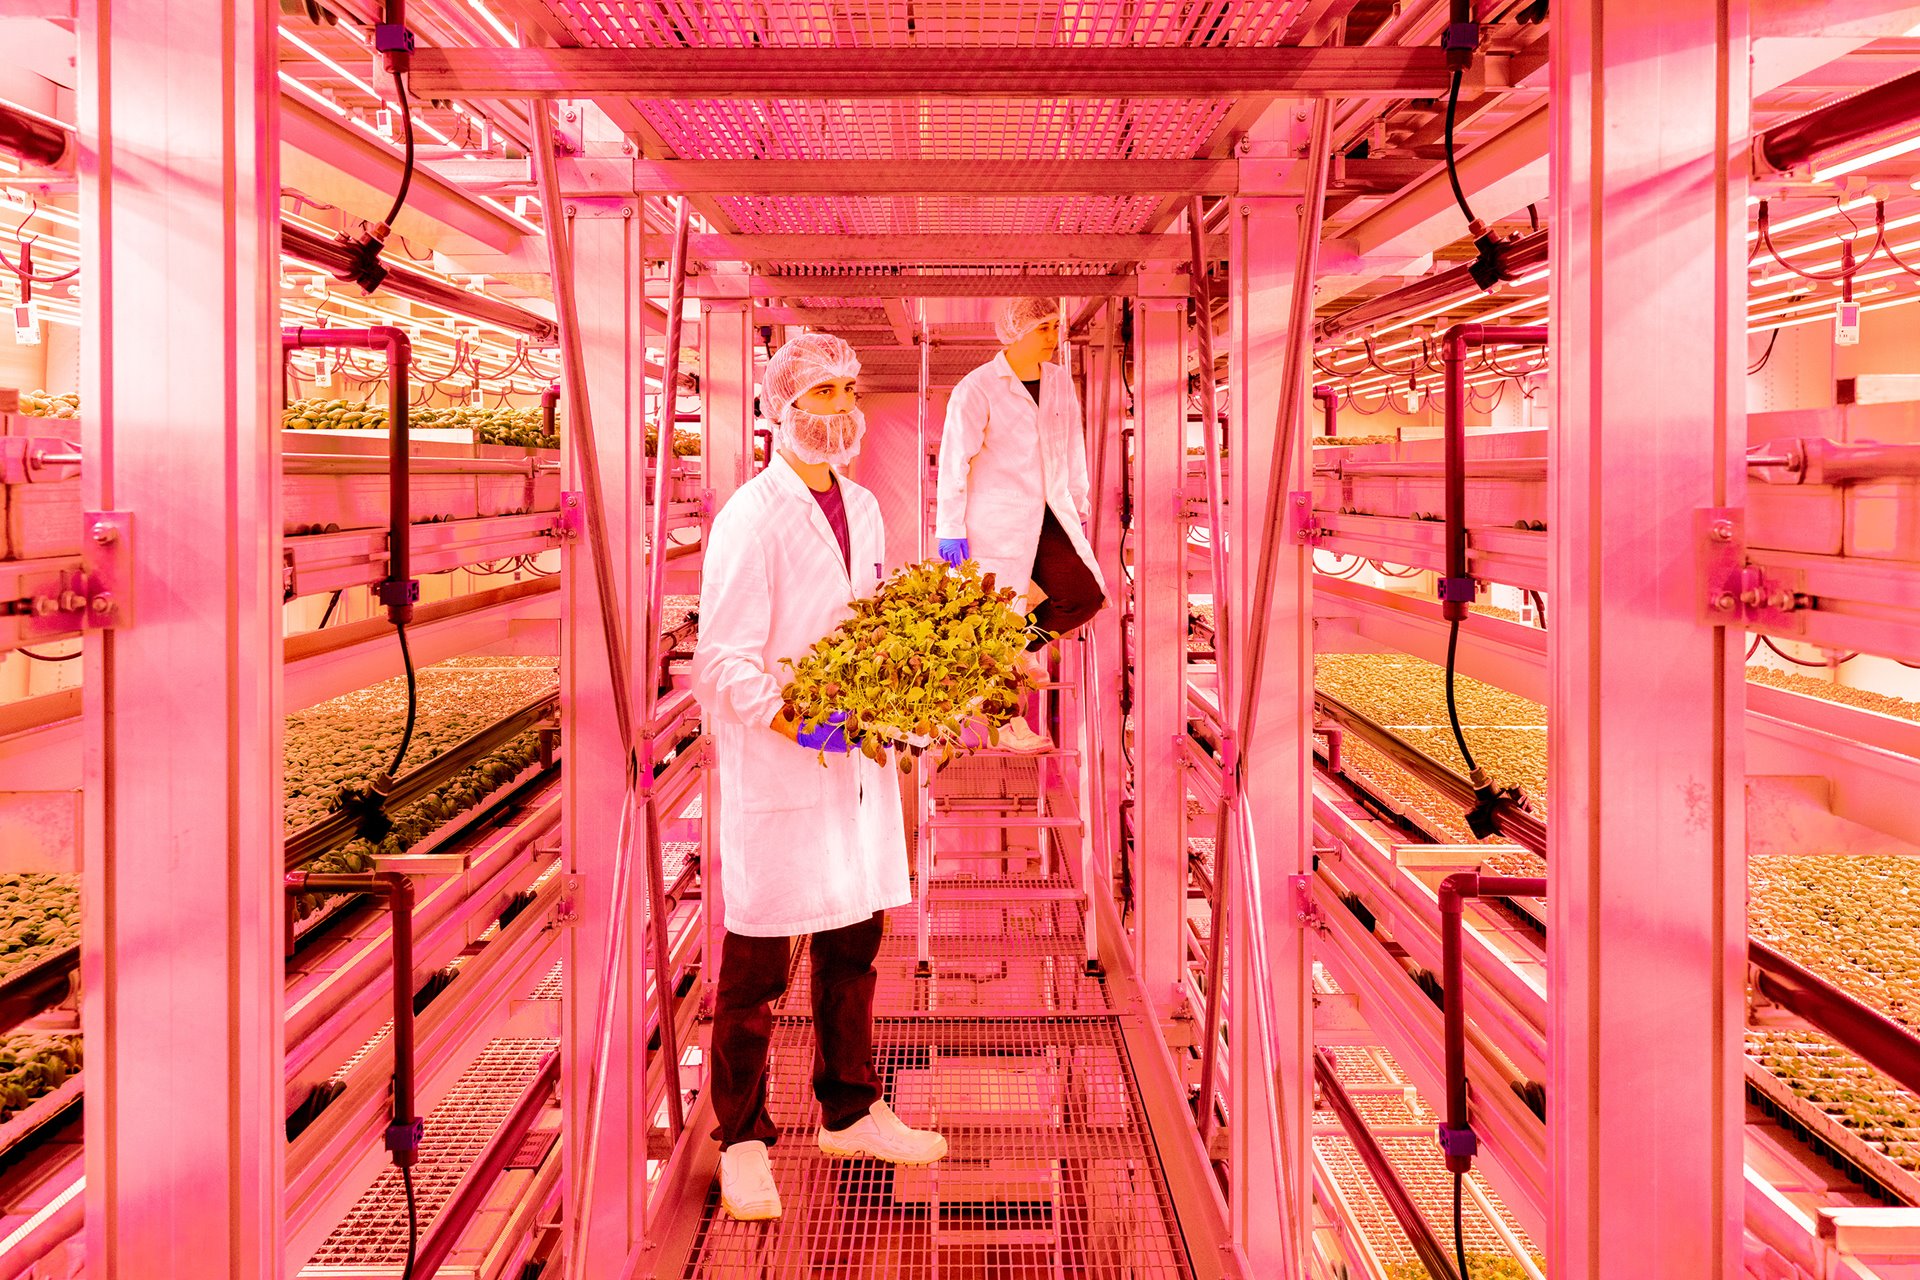 <p>Workers monitor seedling growth at a vertical farm, near Milan, Italy. Crops grown in vertical stacks increase efficiency of land use, and reduce water consumption. According to research published in the <em>International Journal of Agriculture, Environment and Food Sciences</em>, the yield from vertical farm crops is around times higher that of normally produced field crops, and saves about 70-95 percent on water.</p>
